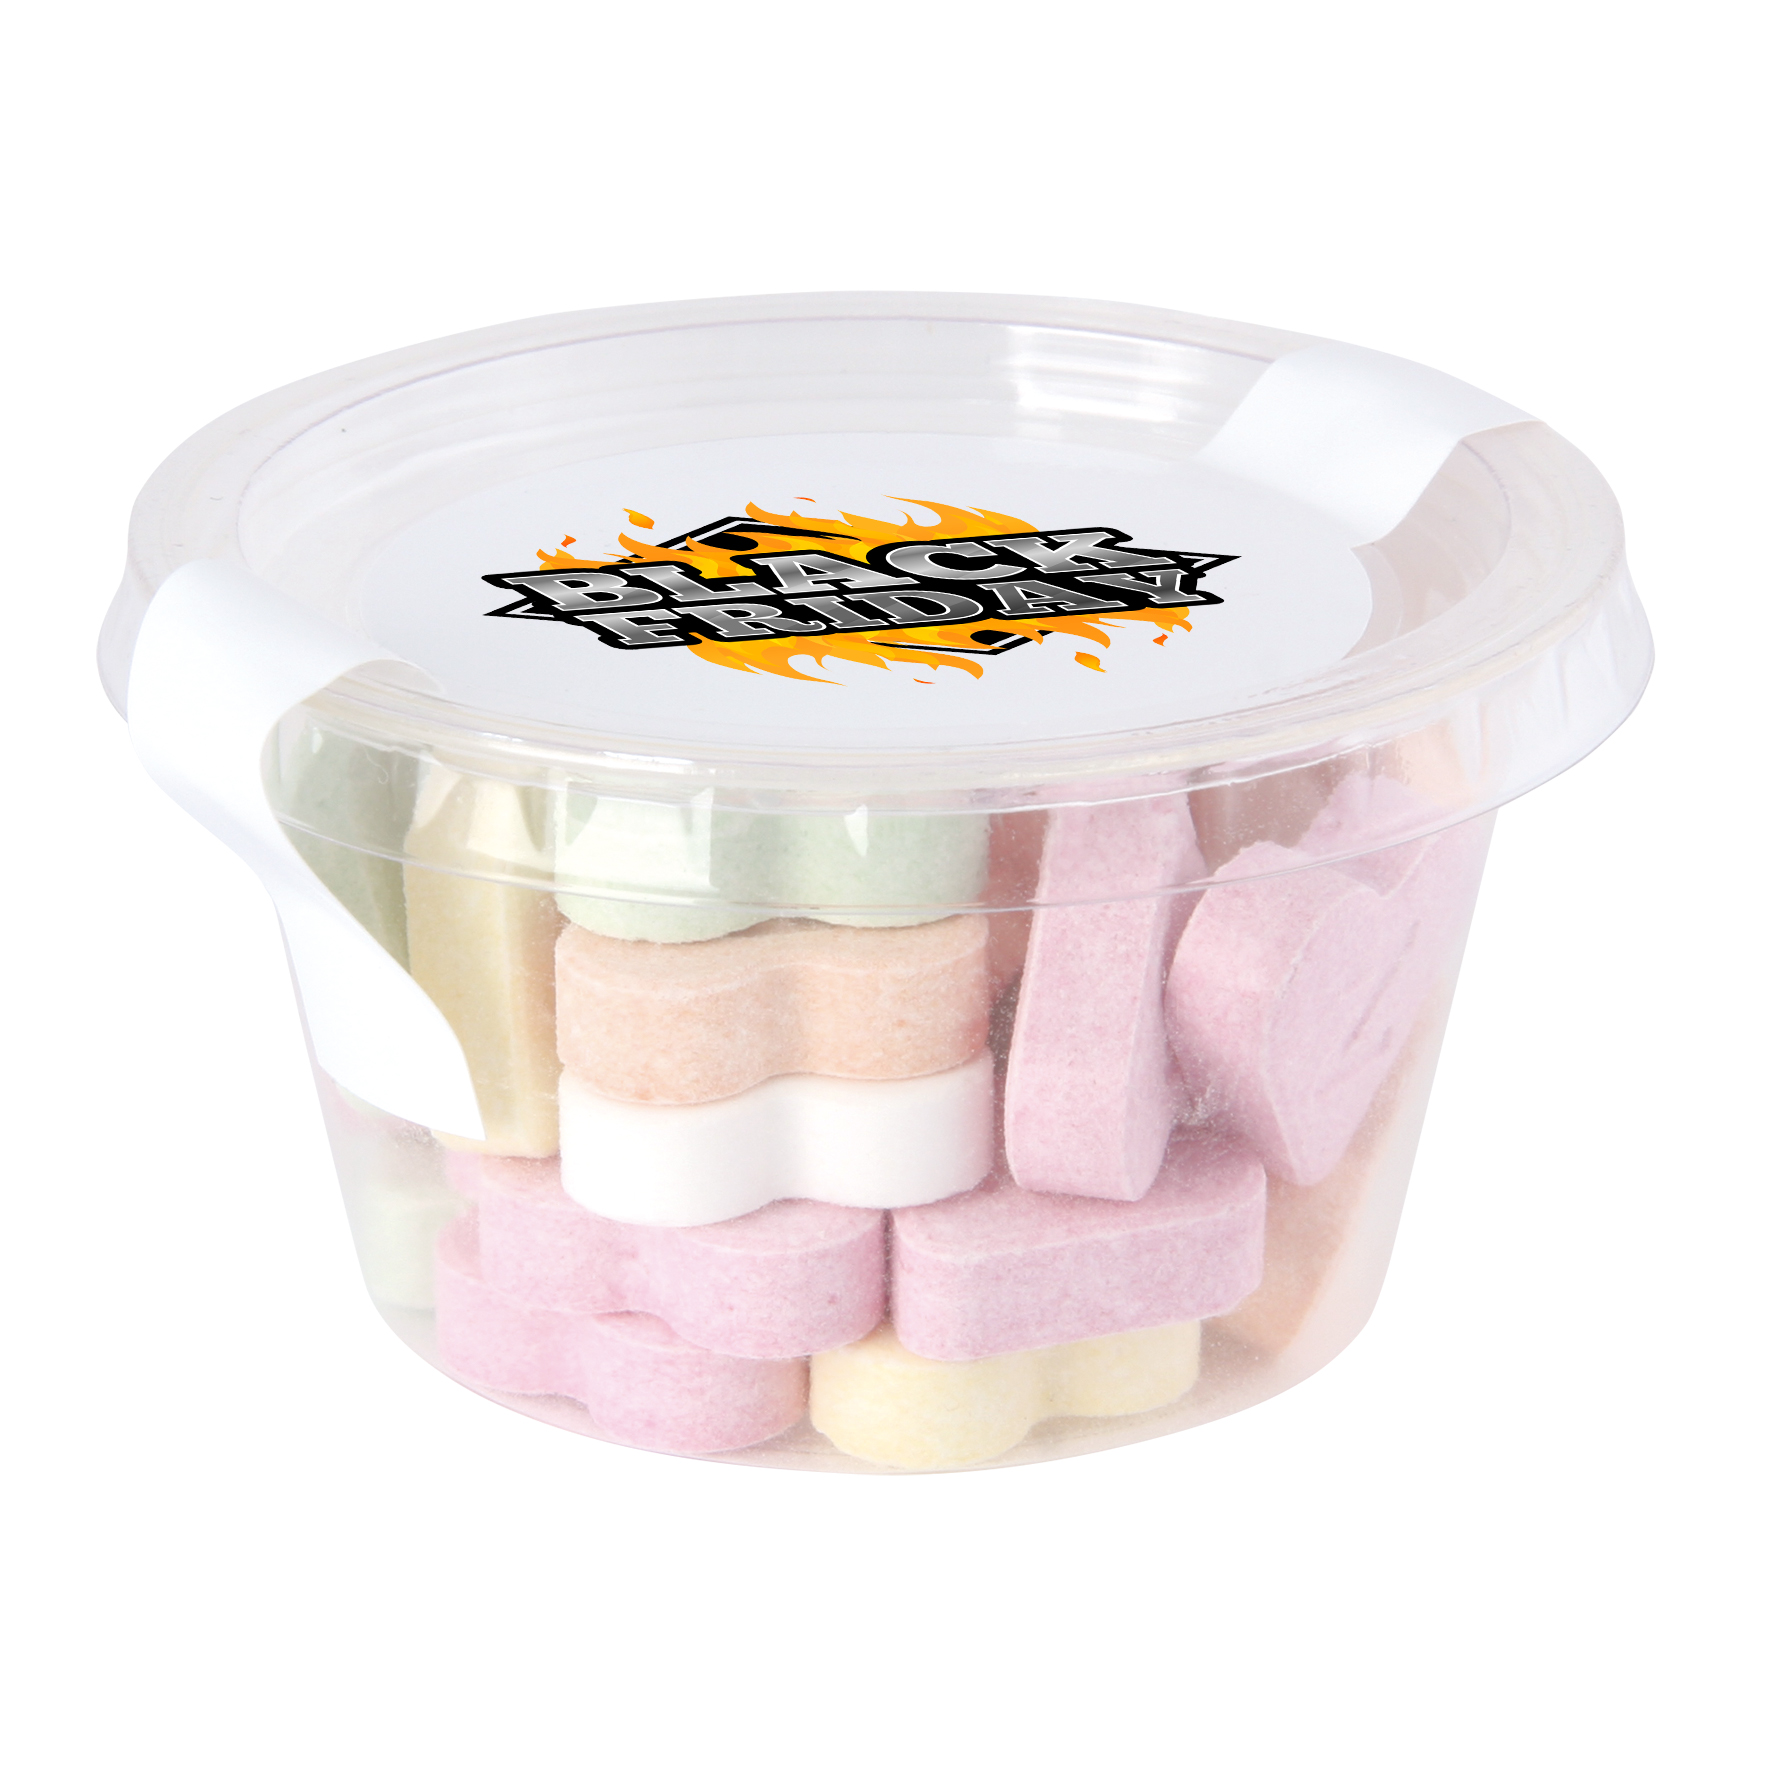 c 0640fh 00 09 - BioBrand small sweet tub,  jelly beans 40gr